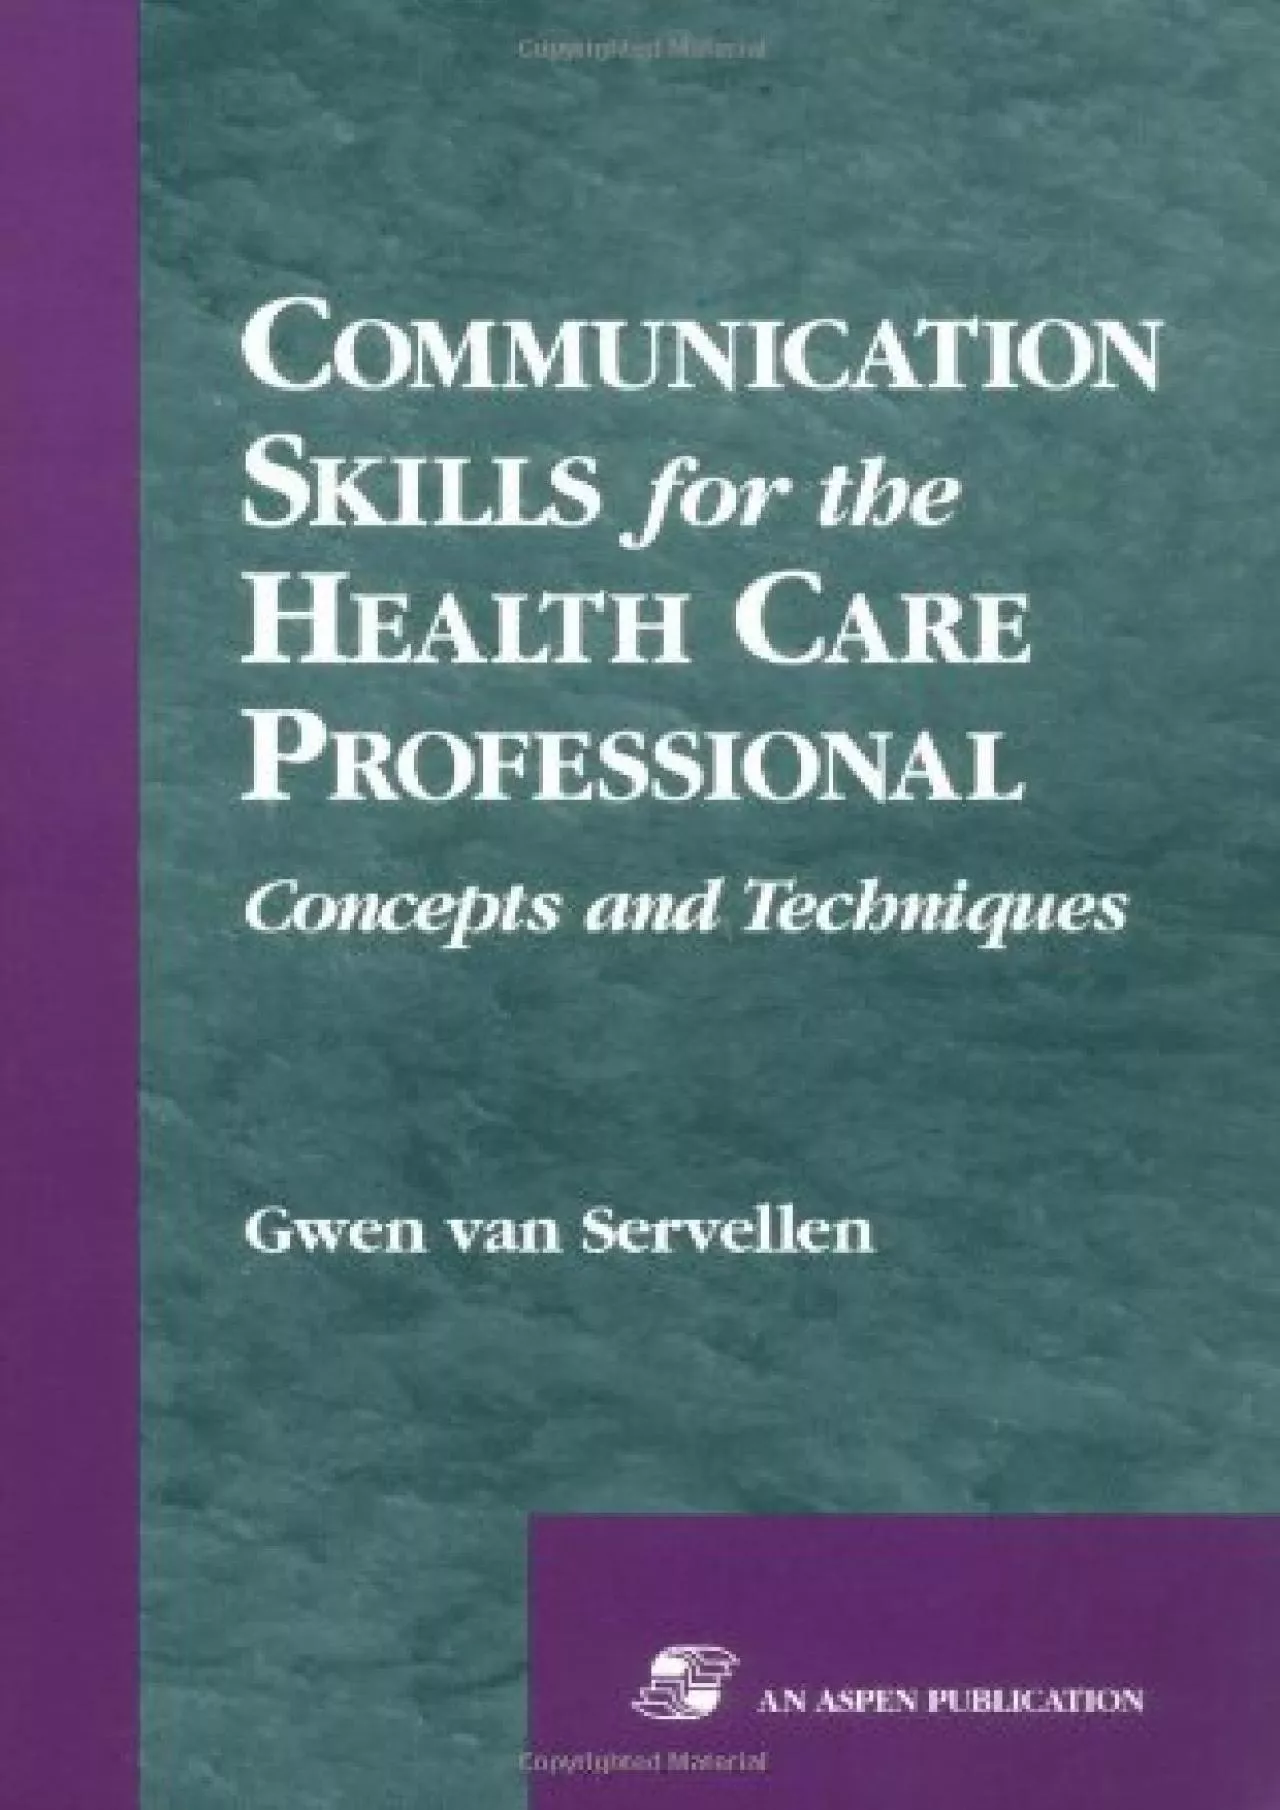 (DOWNLOAD)-Communication Skills for the Health Care Professional: Concepts and Techniques